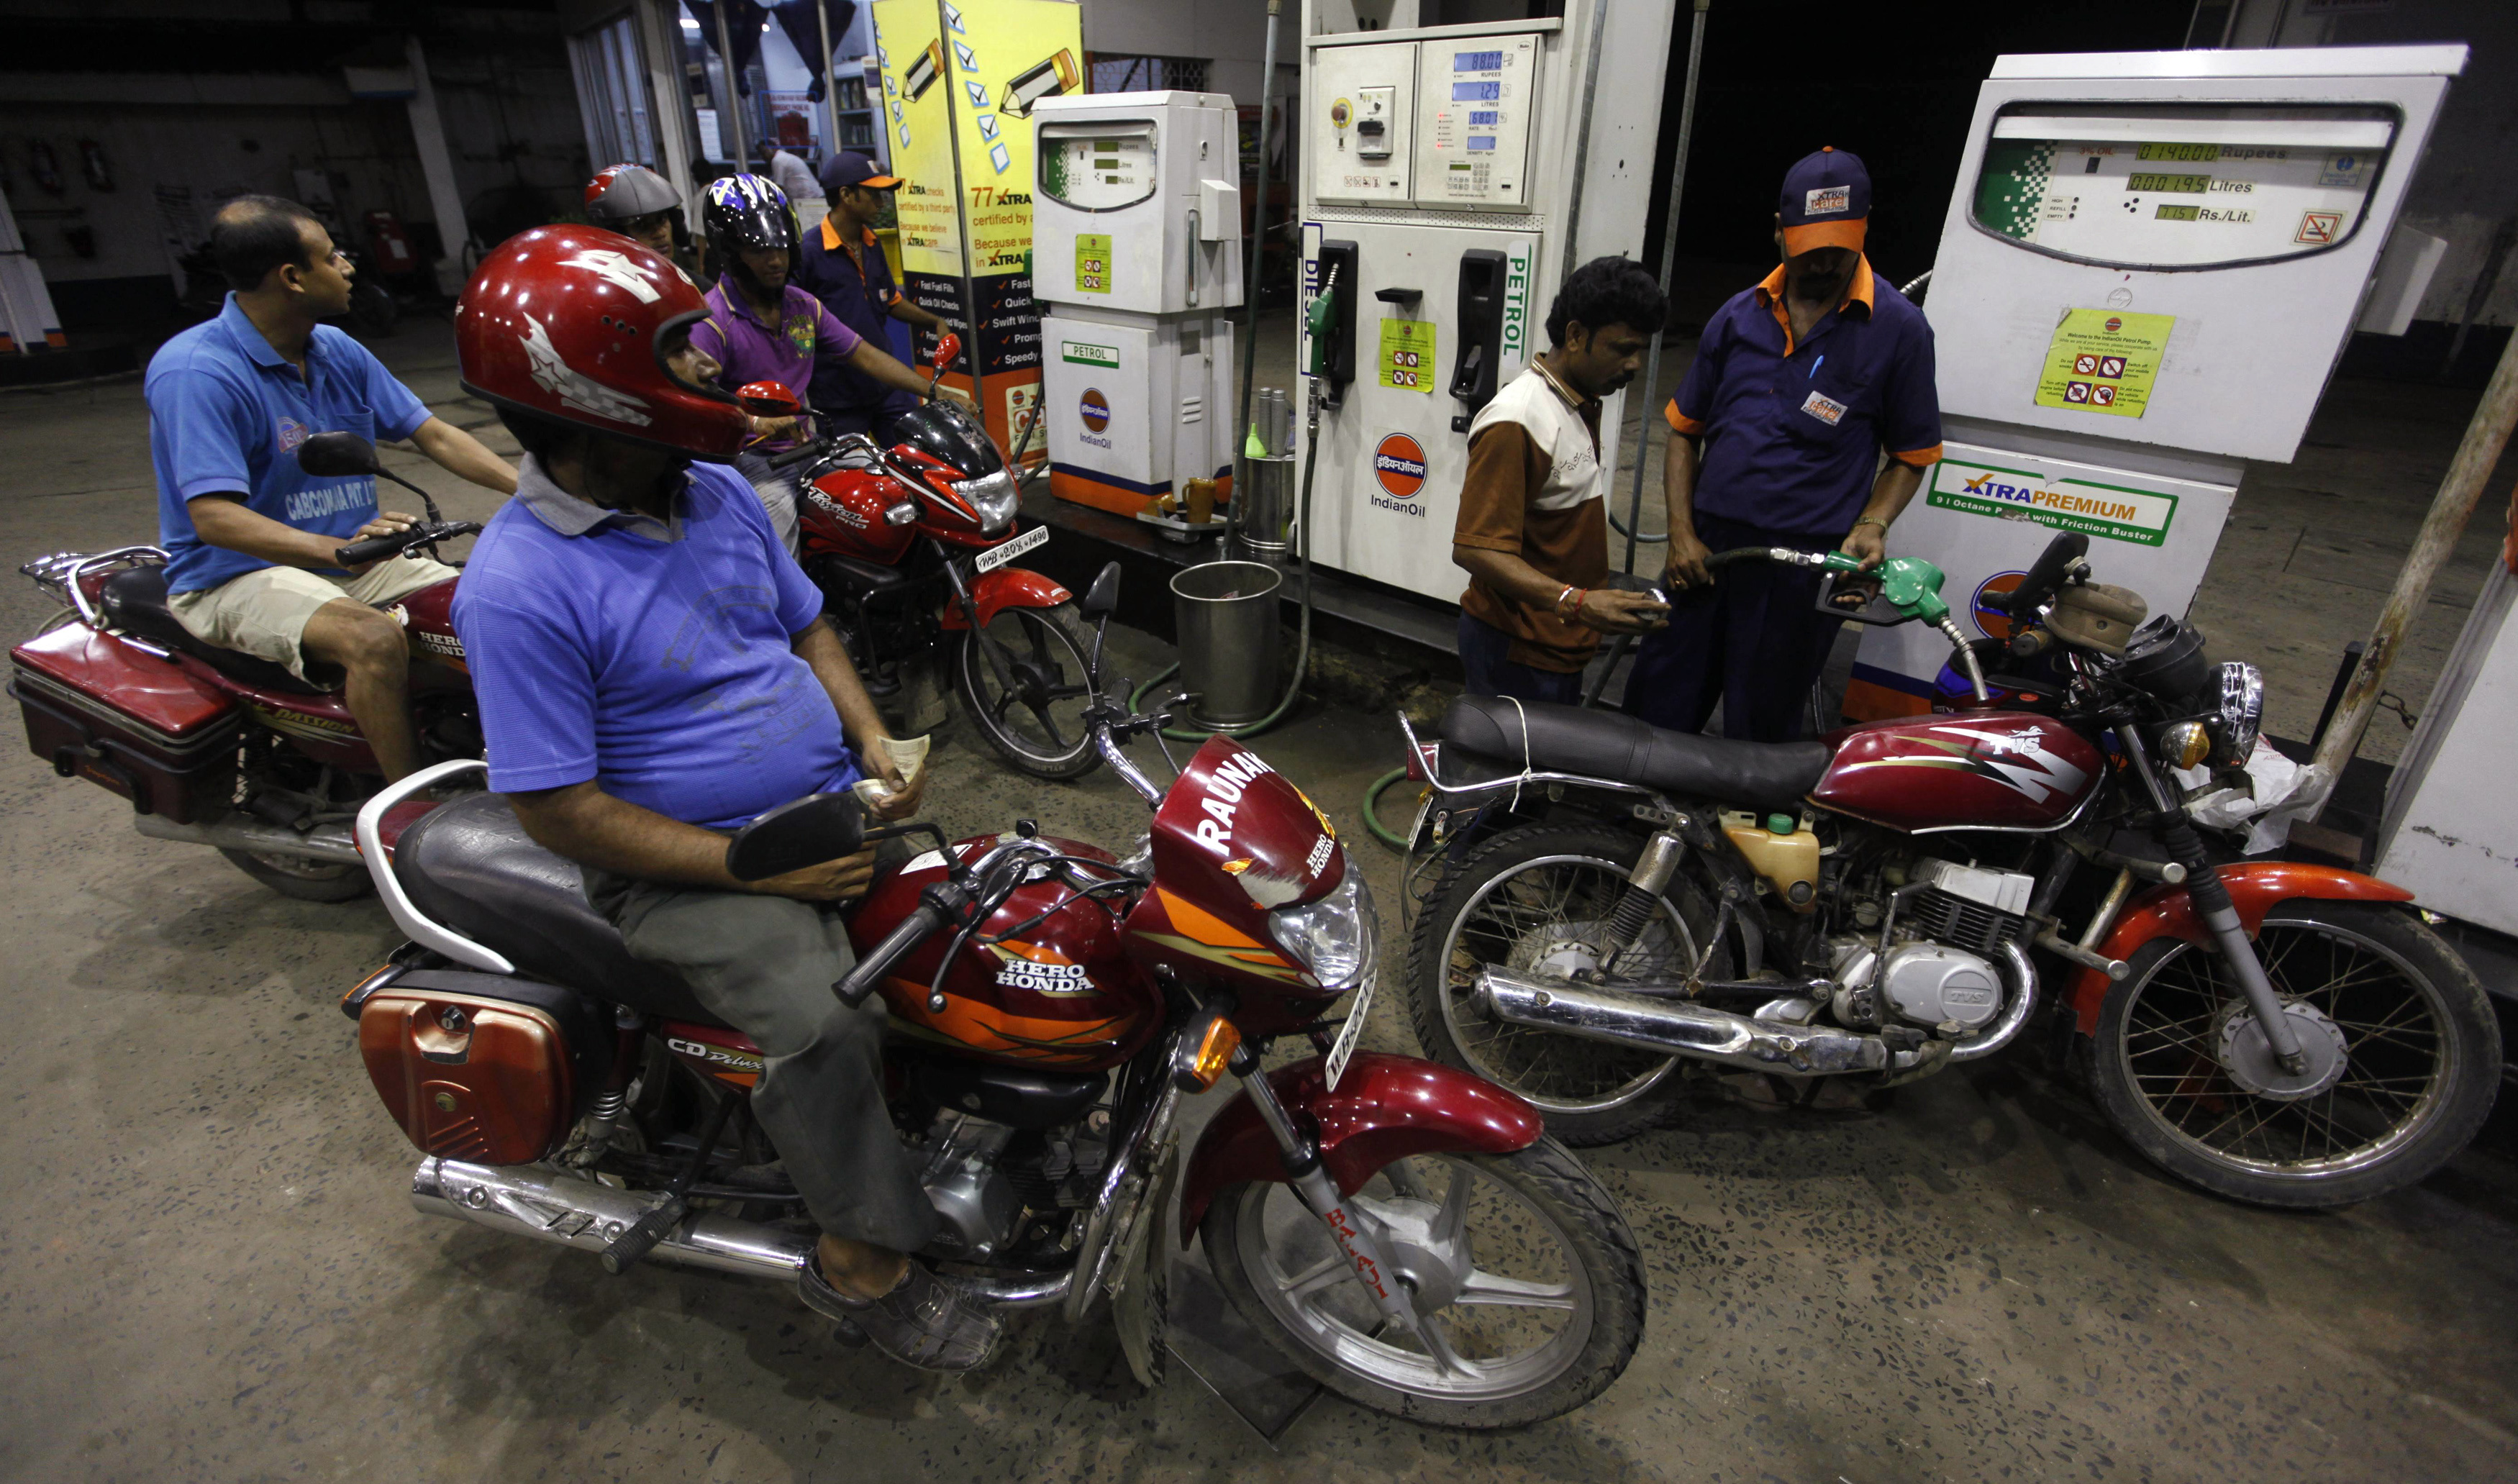 A worker fills a motorcycle with petrol at a fuel station in Kolkata